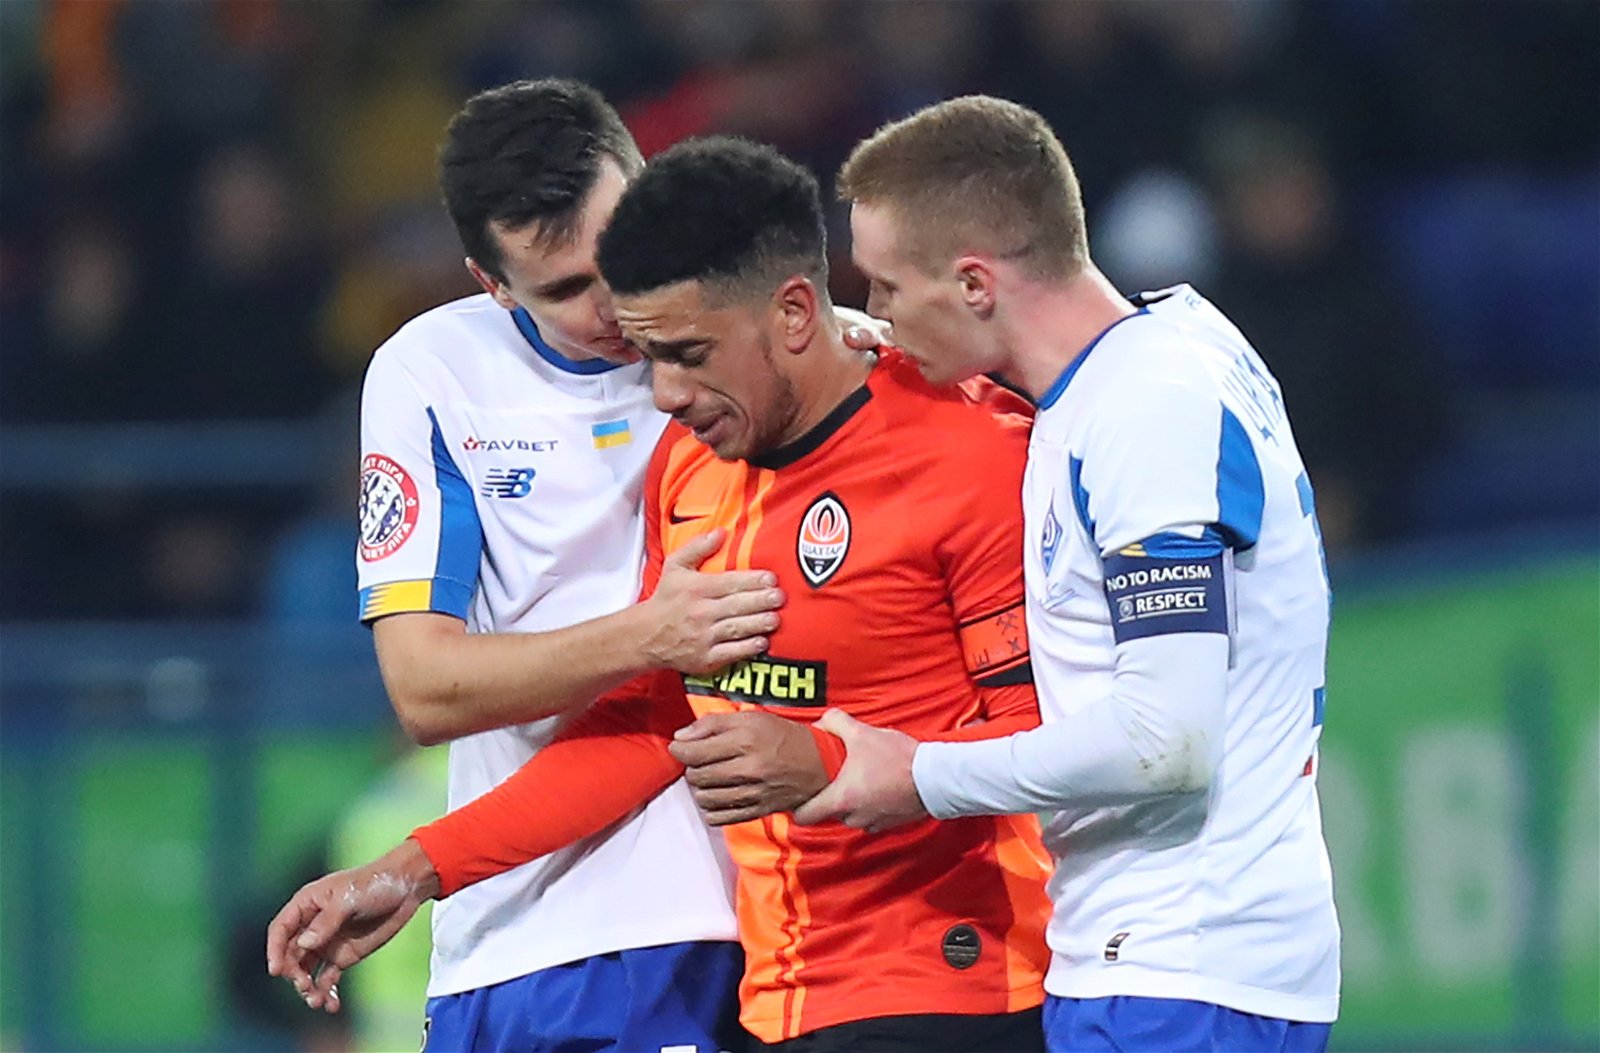 Tearful Shakhtar captain Taison sent off despite being racially abused in Ukraine